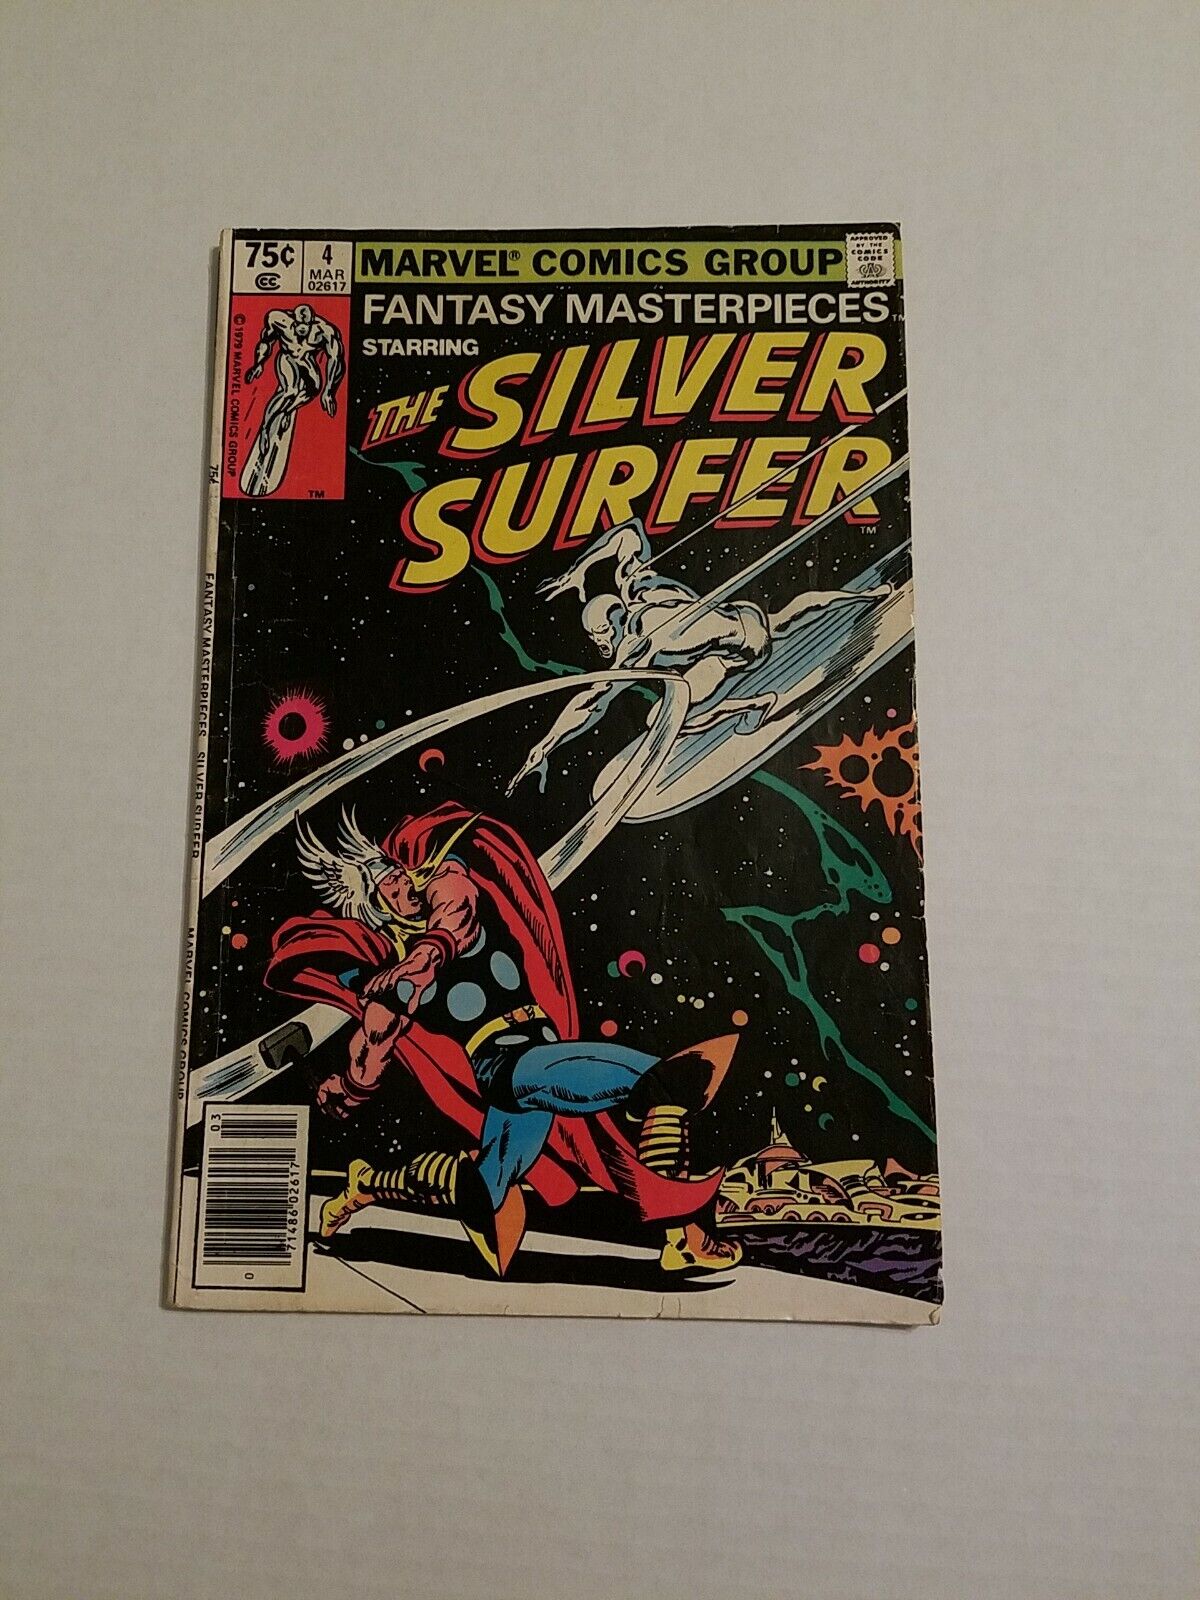 Fantasy Masterpieces #4 The Silver Surfer .  March 1980. 